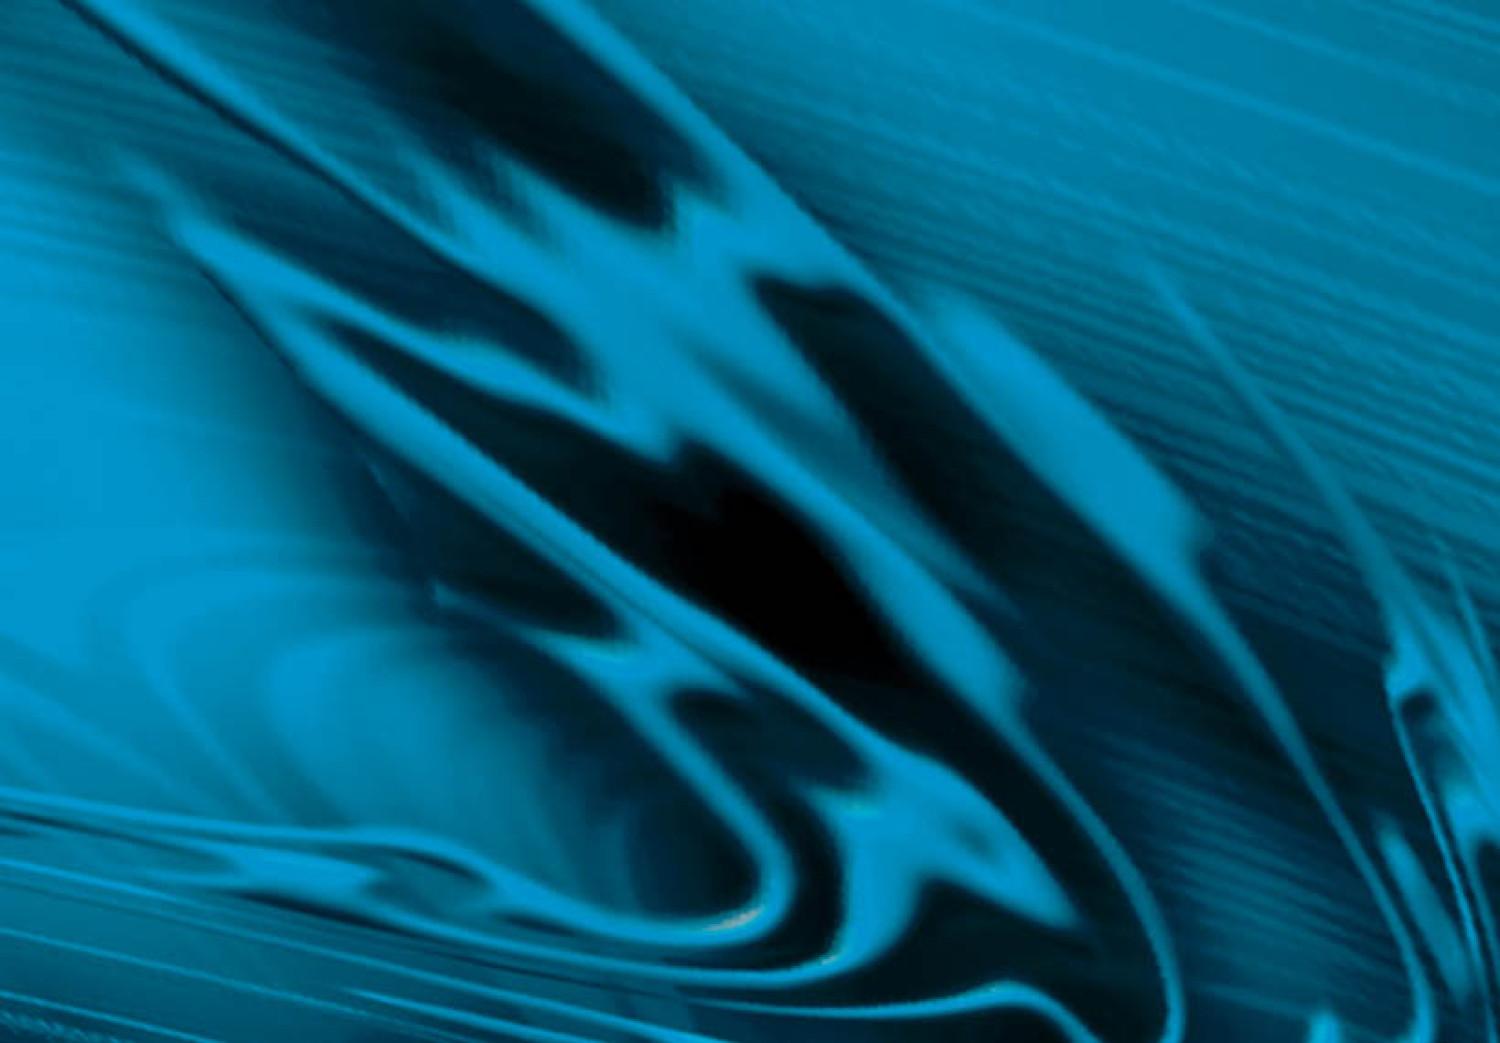 Canvas Blue vortex - abstract, fancy with blue and black graphics